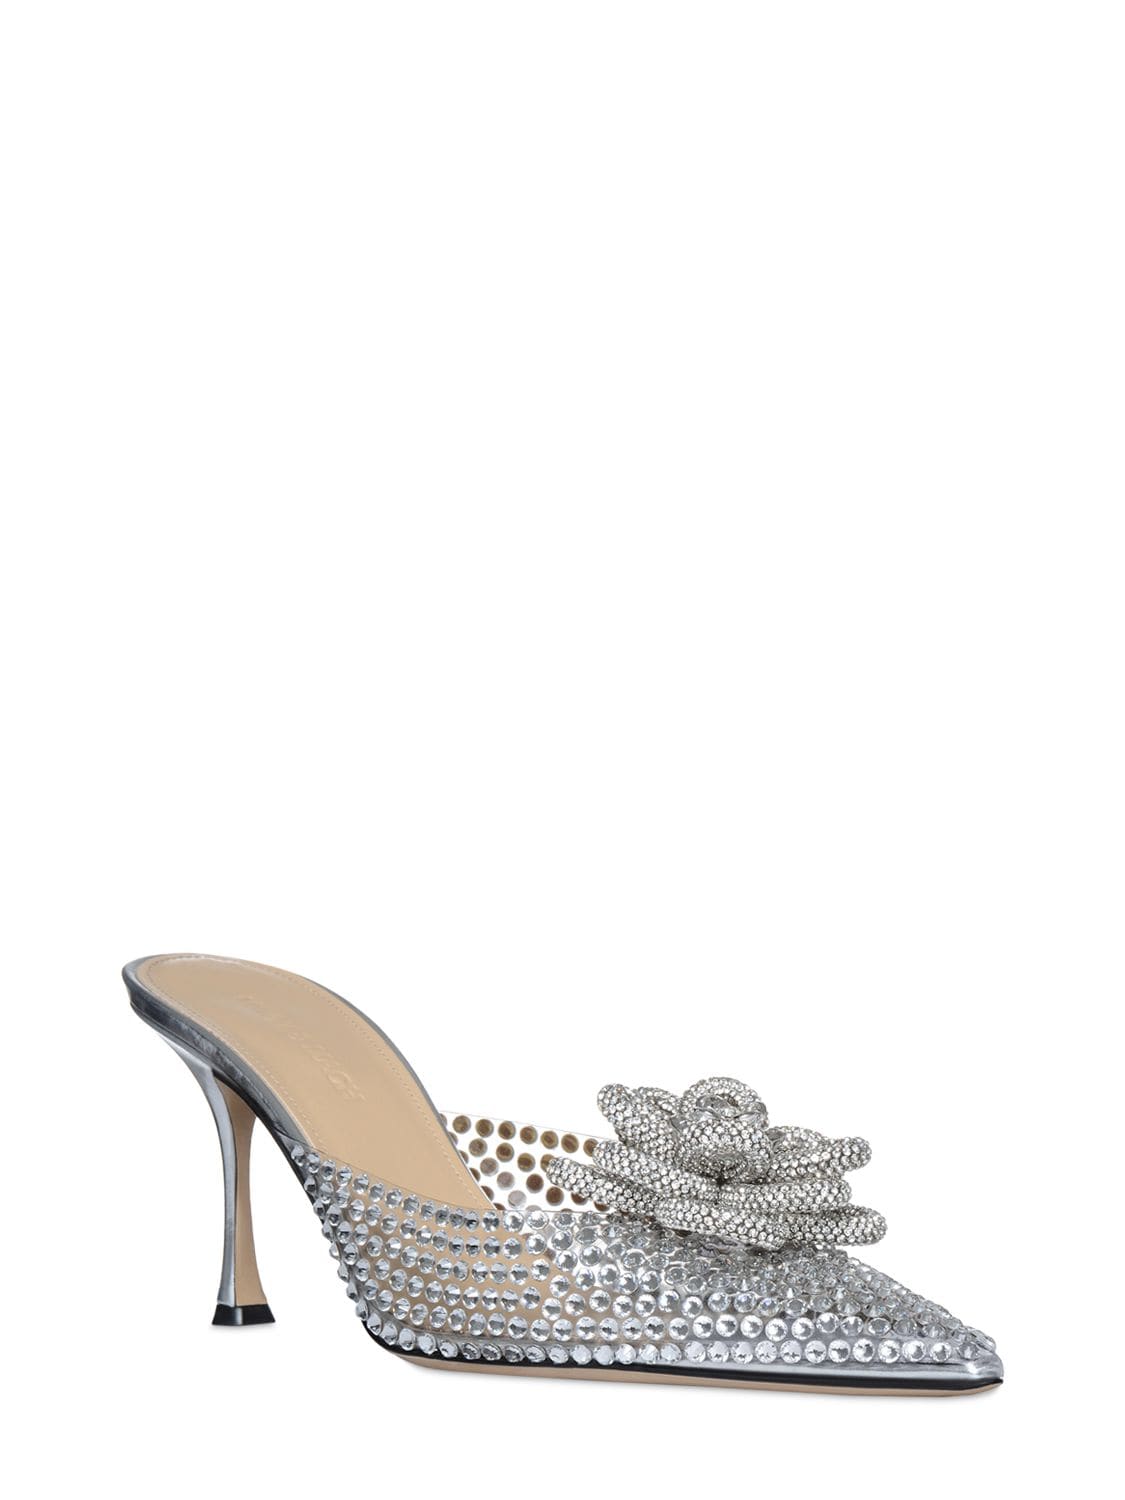 Mach & Mach 85mm Flower Embellished Pvc Mules In Silver | ModeSens